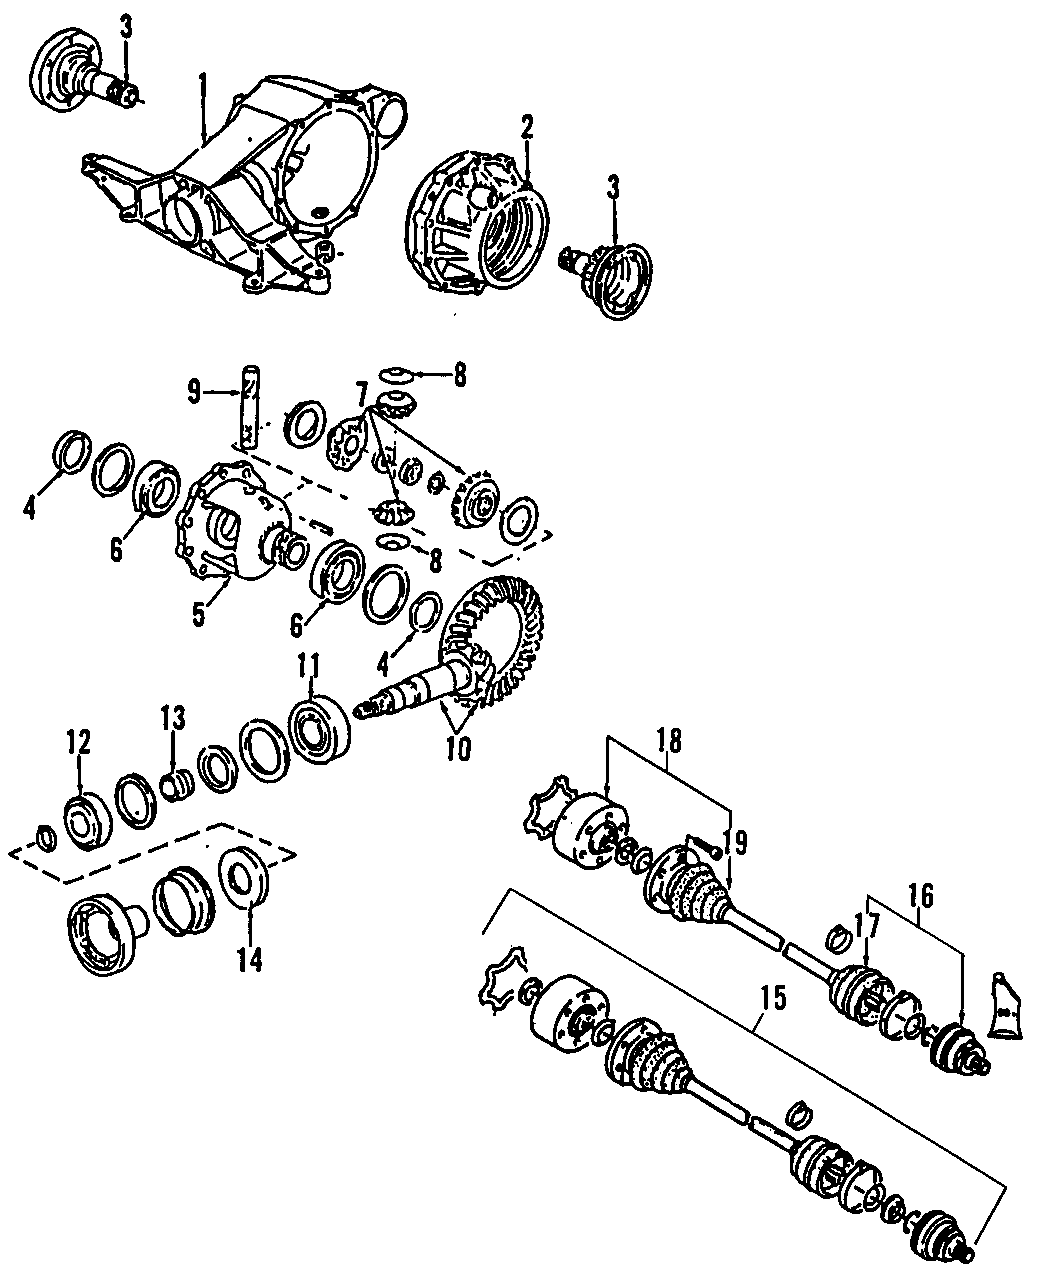 9DRIVE AXLES. REAR AXLE. AXLE SHAFTS & JOINTS. DIFFERENTIAL. PROPELLER SHAFT.https://images.simplepart.com/images/parts/motor/fullsize/F208150.png